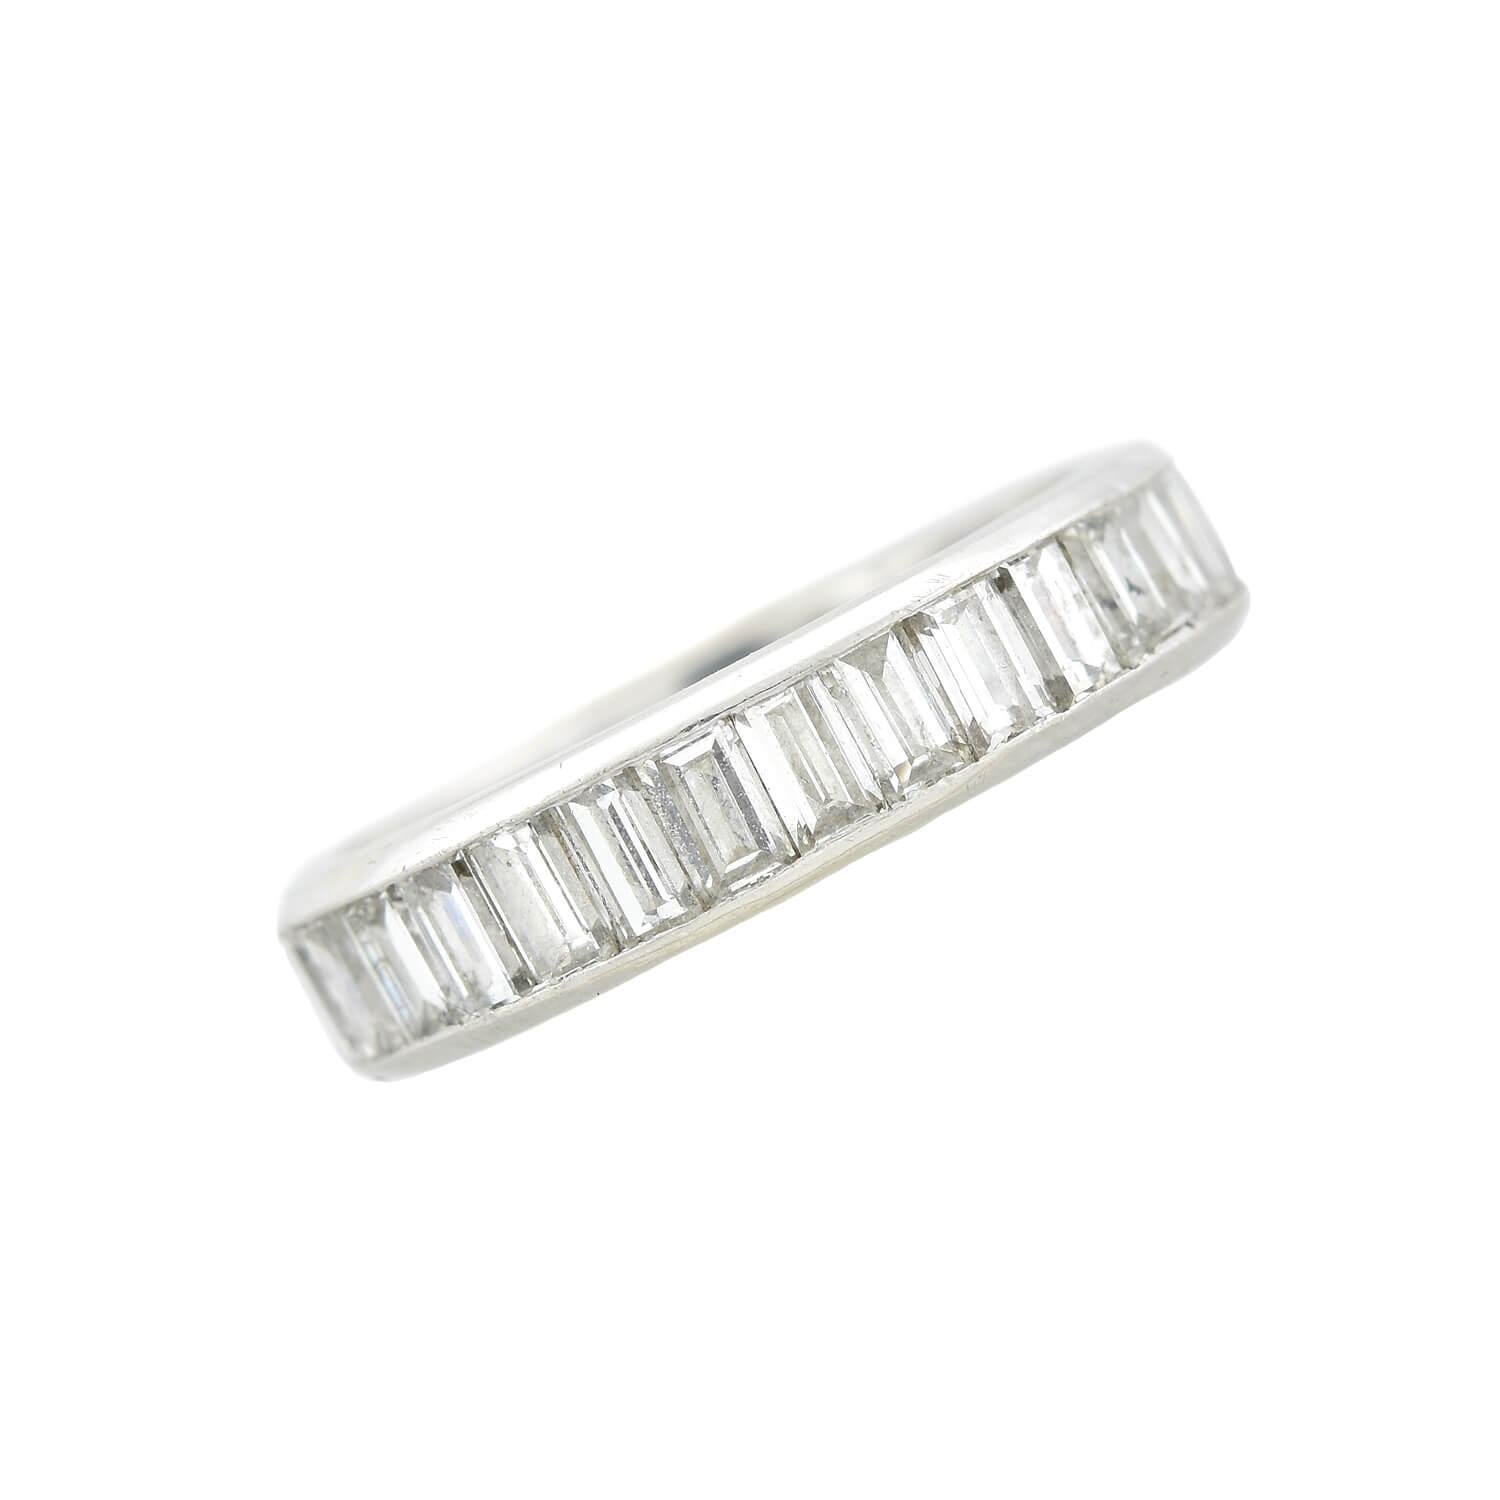 A stunning diamond eternity band from the Art Deco (ca1930s) era! This gorgeous ring is made of platinum and holds a row of sparkling baguette diamonds in a channel setting. The diamonds carry all the way around the entire surface of the ring